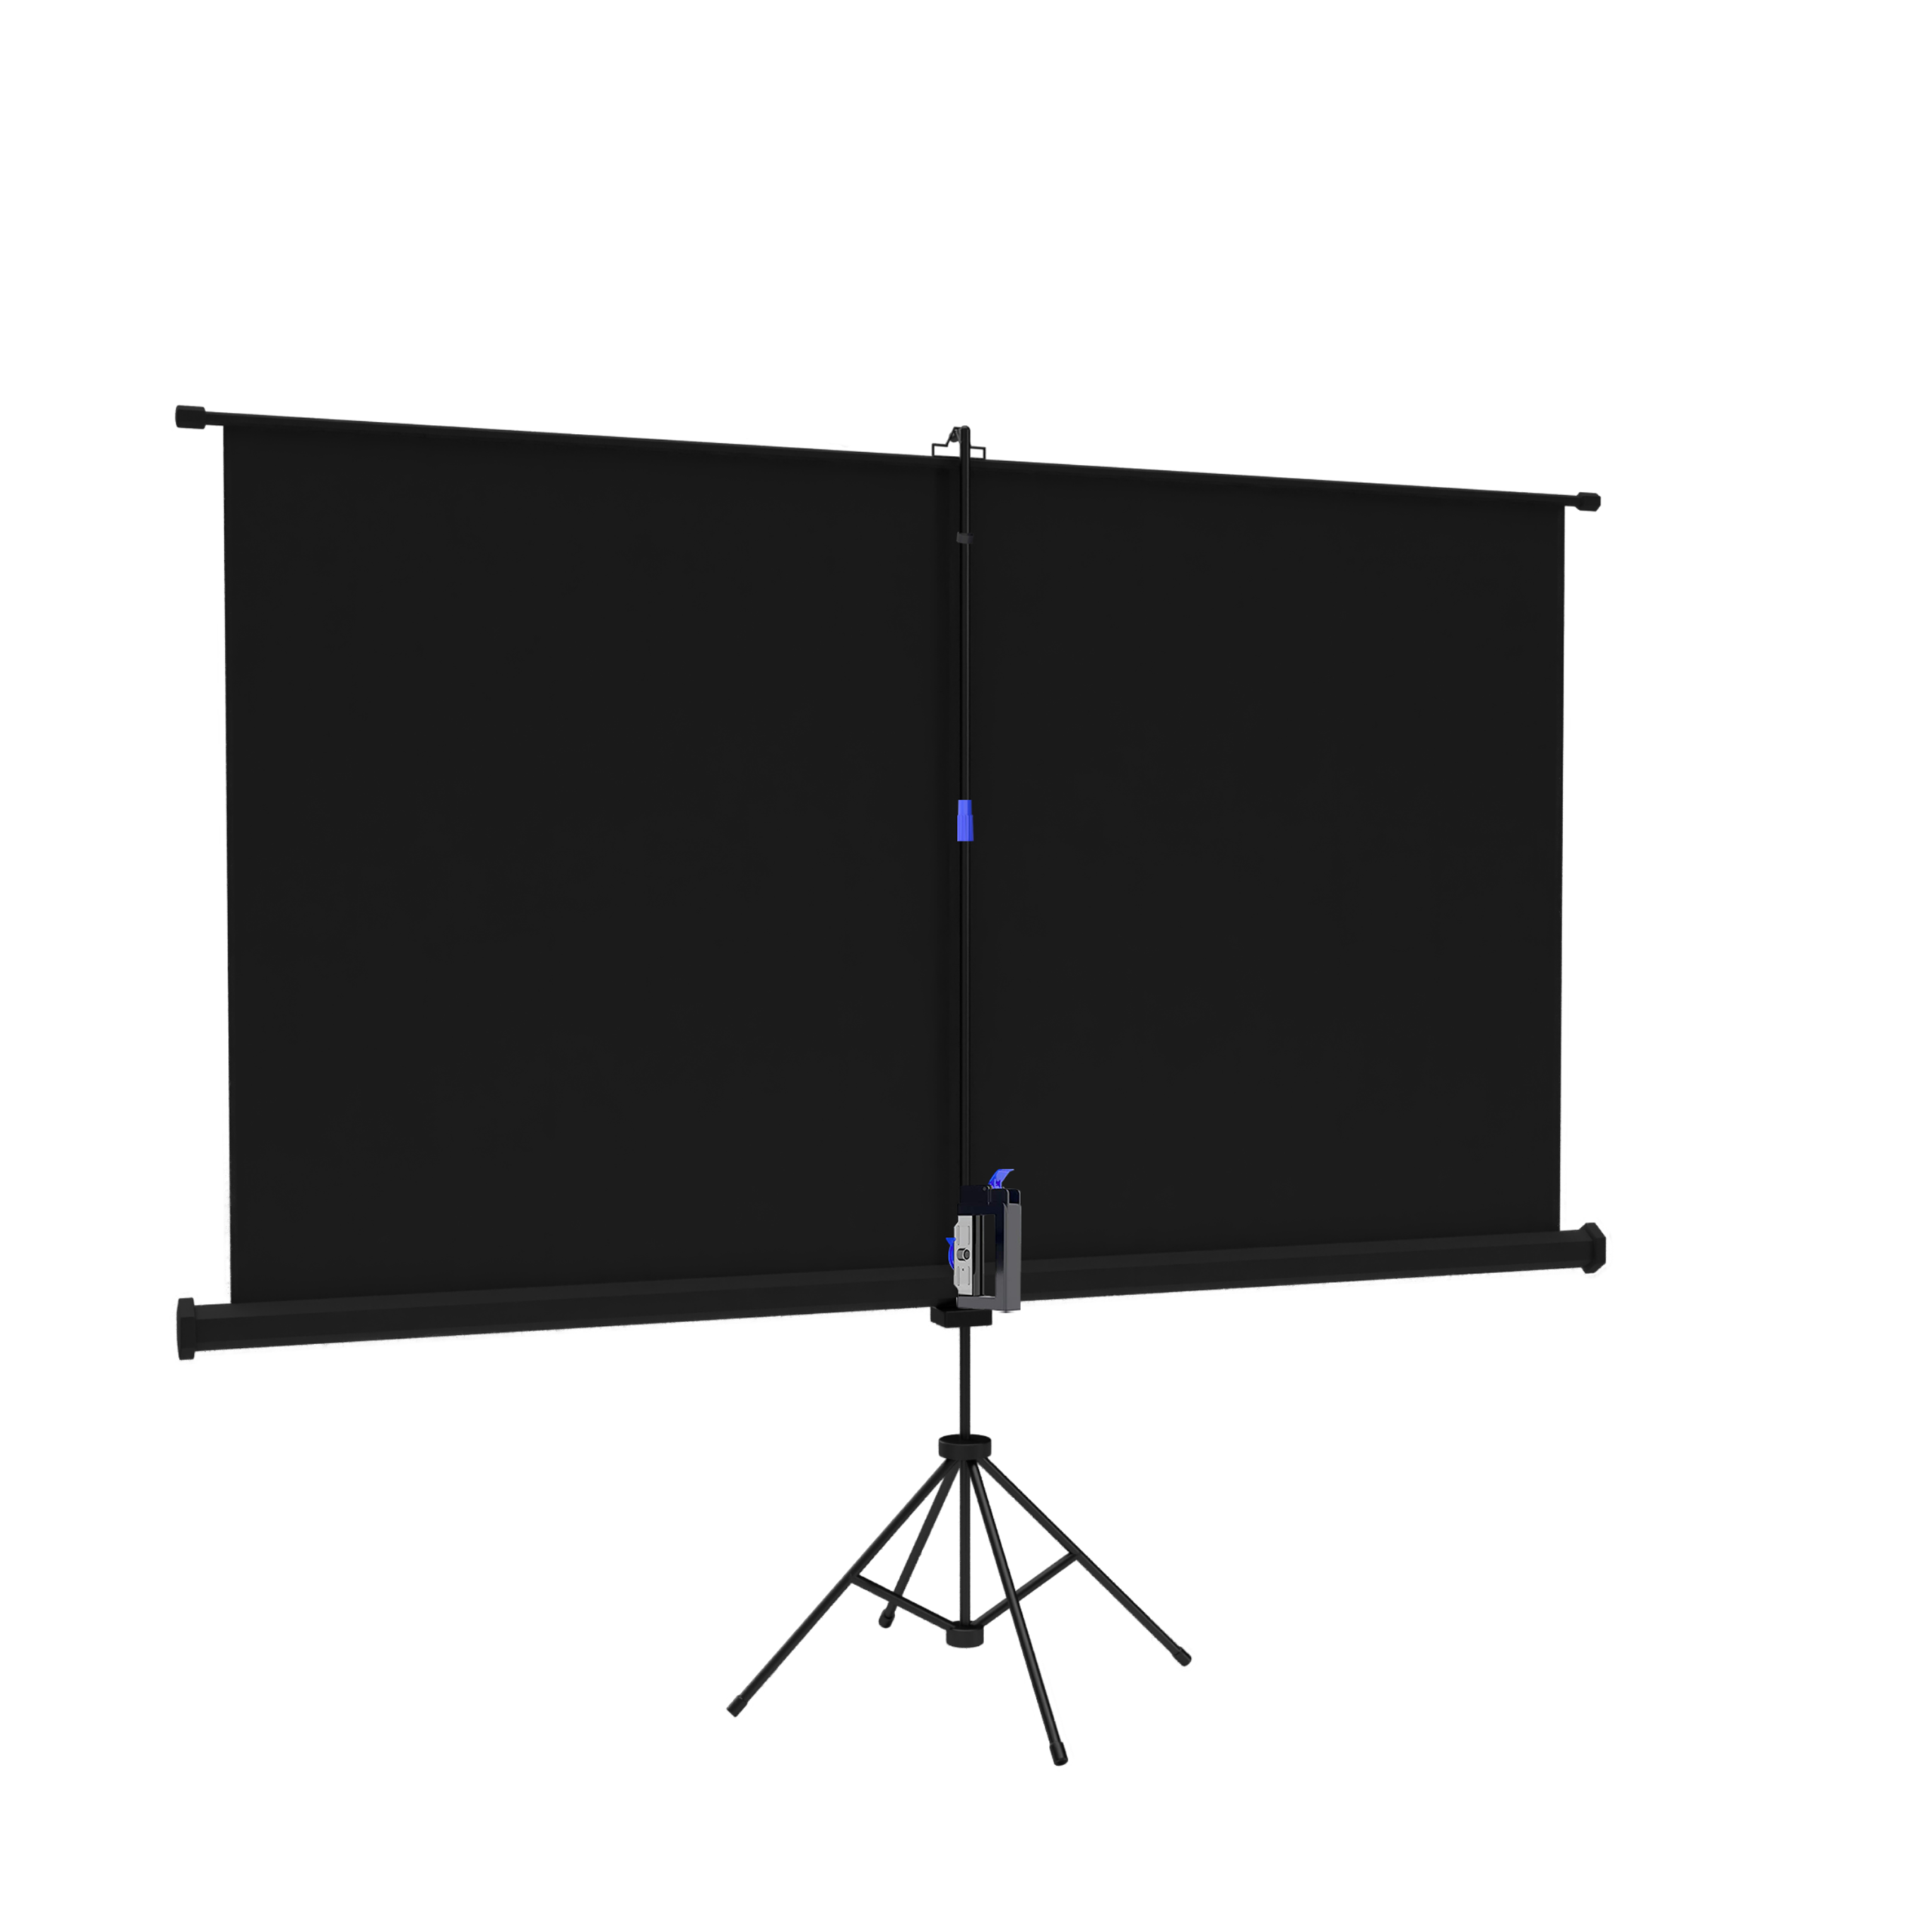 FurniTure Projector Screen 100 Inch 16:9 Portable Projector Screen Projection Screen Projector Screen Tripod Anti-Cease 160° Viewing Angle Support Home Theater Indoor Outdoor 